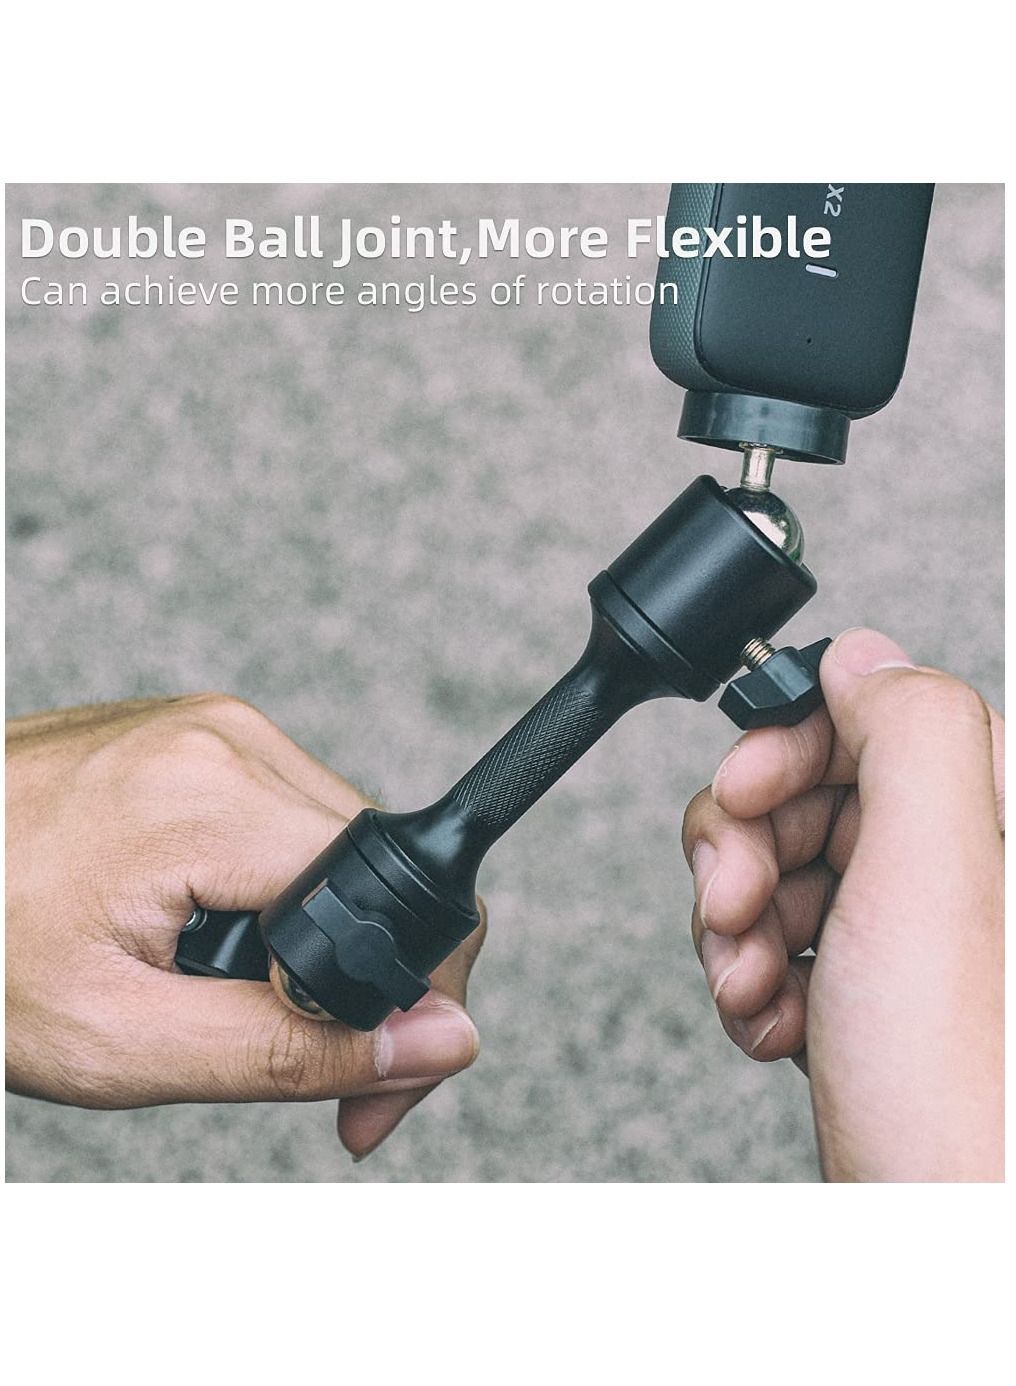 Double Ball Joint Rotating Motorcycle Bracket, suitable for Insta360 one X2 Accessories GoPro DJI Action Camera Fixed GoPro Hero 10 9 8 7 6 5/SJCAM/Campark/Crosstour/DJI Osmo Action 2 Camera,  Black 